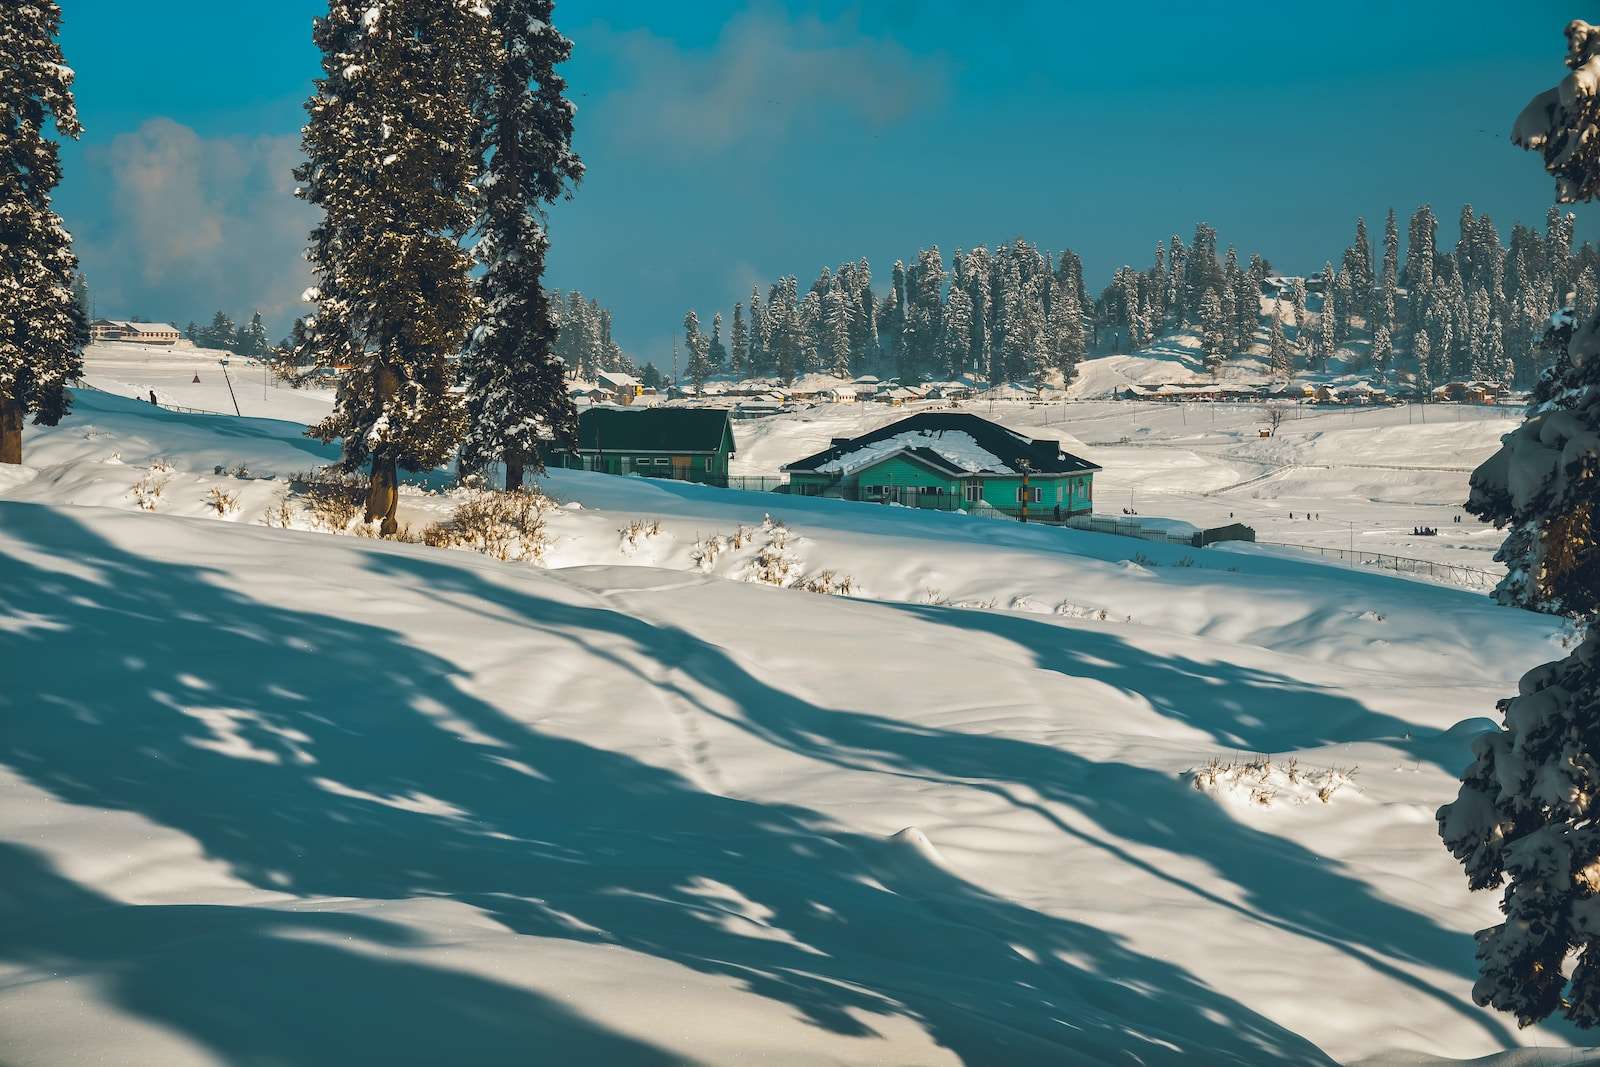 Kashmir in december (a snow covered hill with a house in the distance)